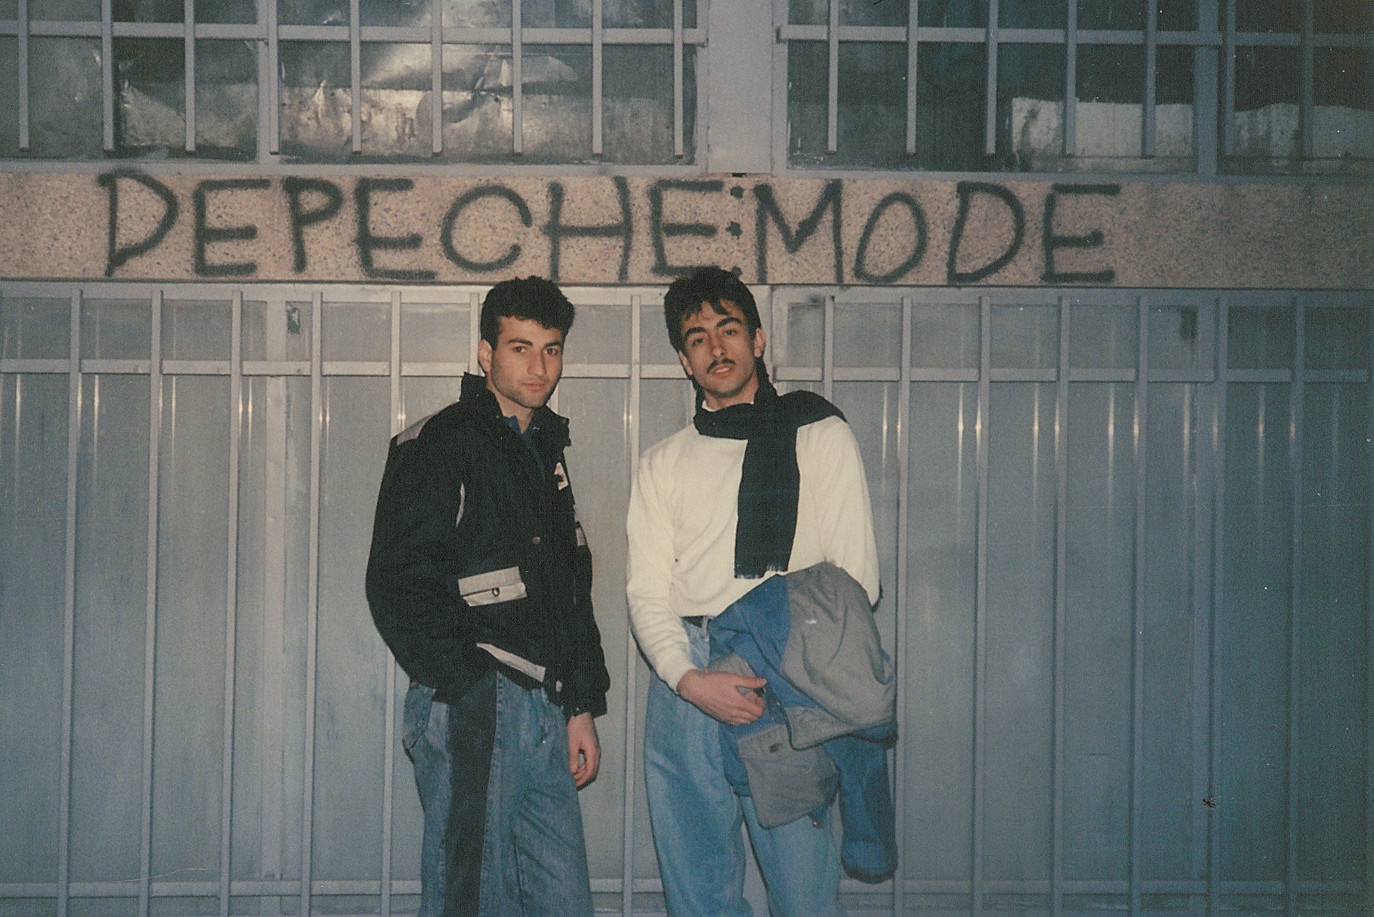 Jeremy Deller and Nick Abrahams   “Our Hobby is Depeche Mode”, 2006   Production still showing Depeche Mode fans in Tehran, Iran   Courtesy of the Artist and The Modern Institute/Toby Webster Ltd, Glasgow   Photo: Jeremy Deller 